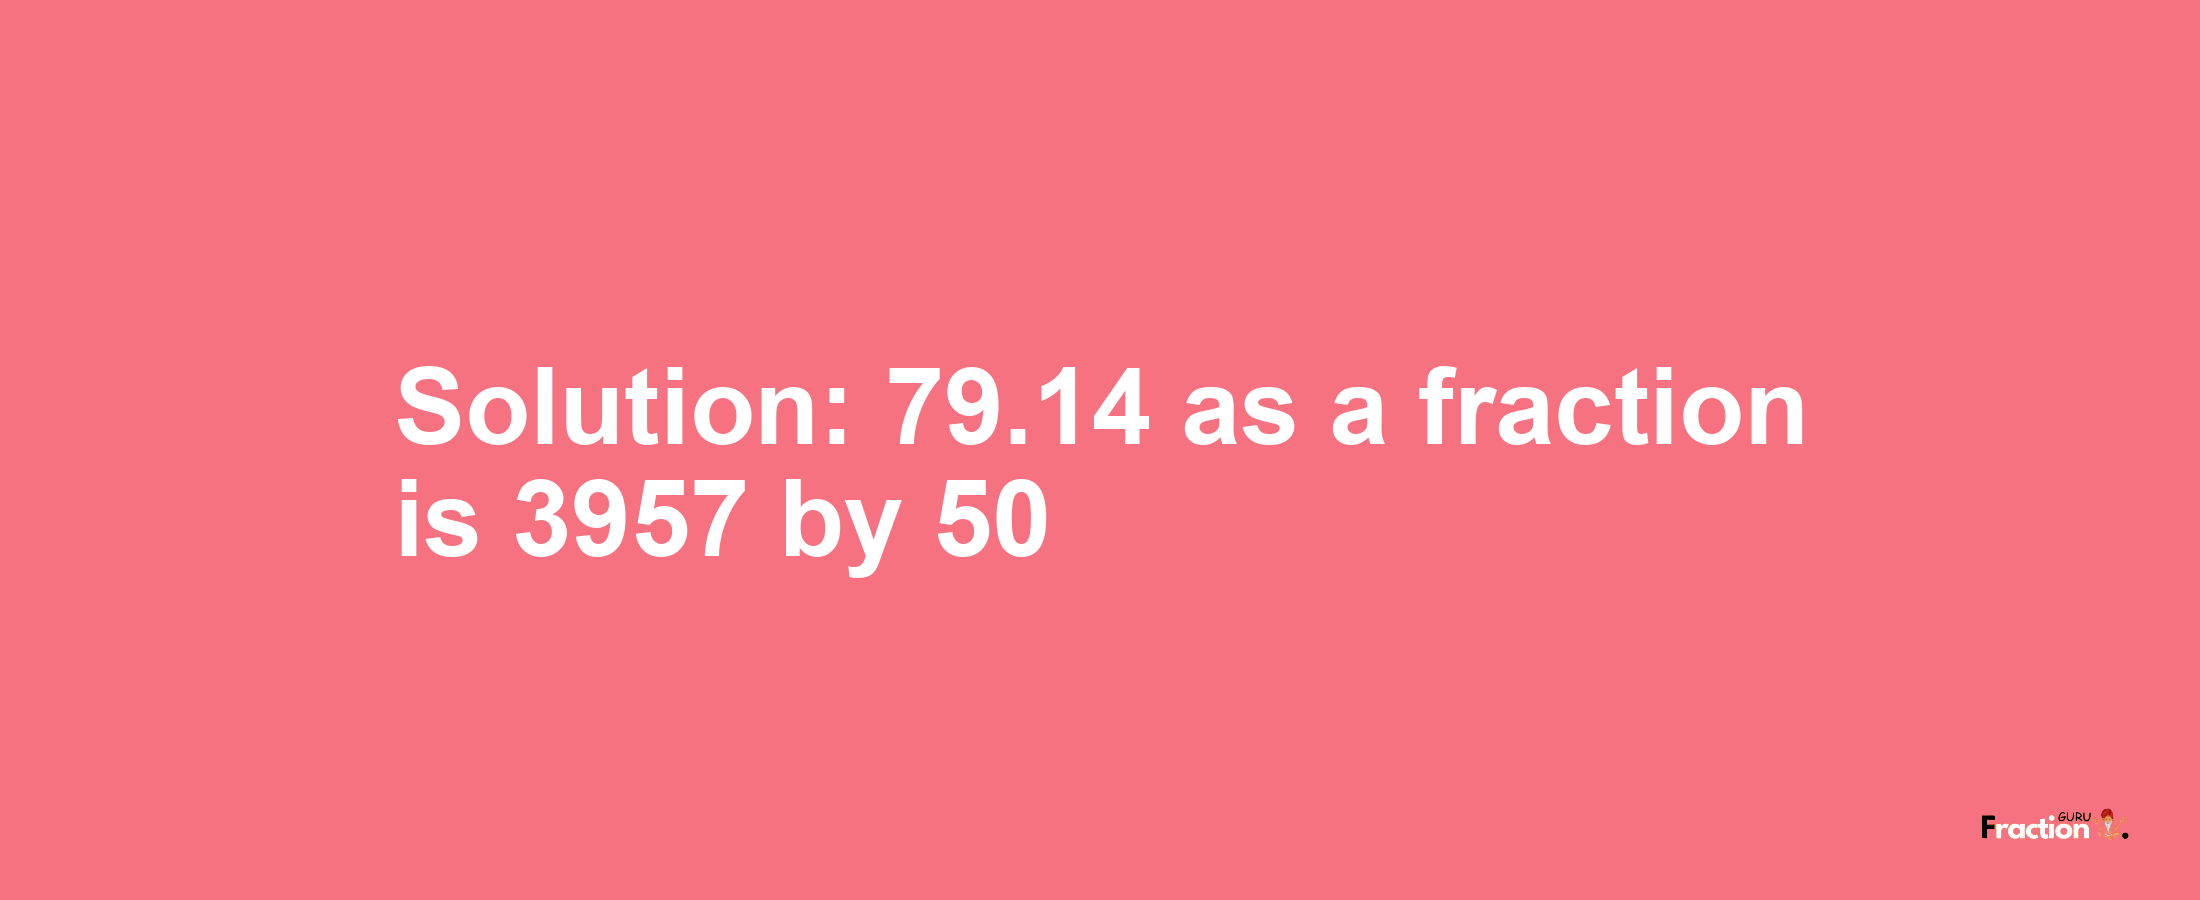 Solution:79.14 as a fraction is 3957/50